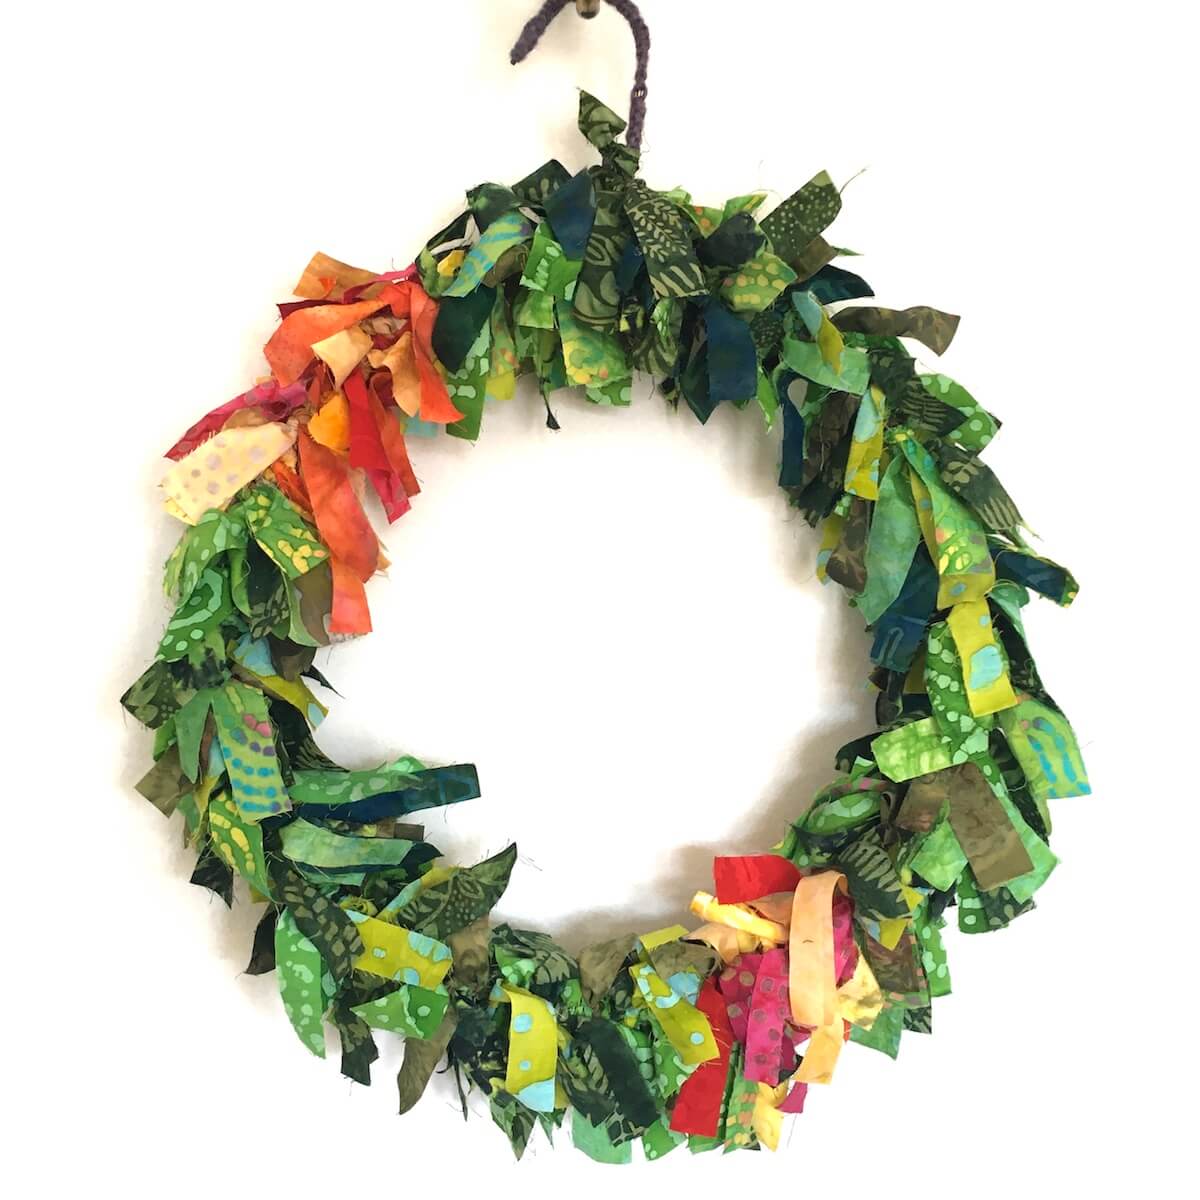 Why I don't do holiday gifts: A DIY wreath made out of fabric scraps.